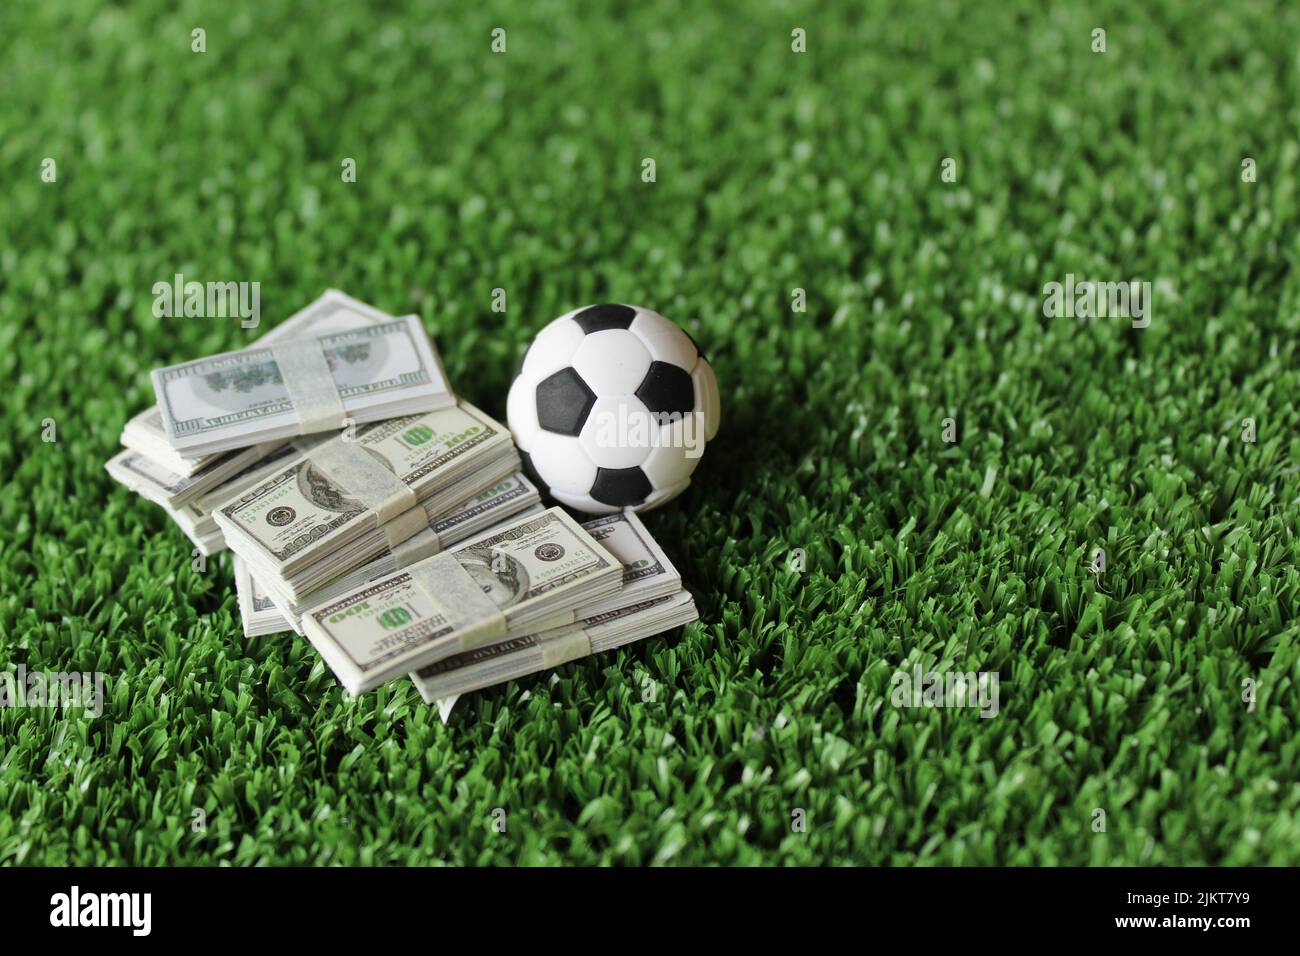 Selective focus image of soccer football and money on field. Sport betting and bribery concept Stock Photo